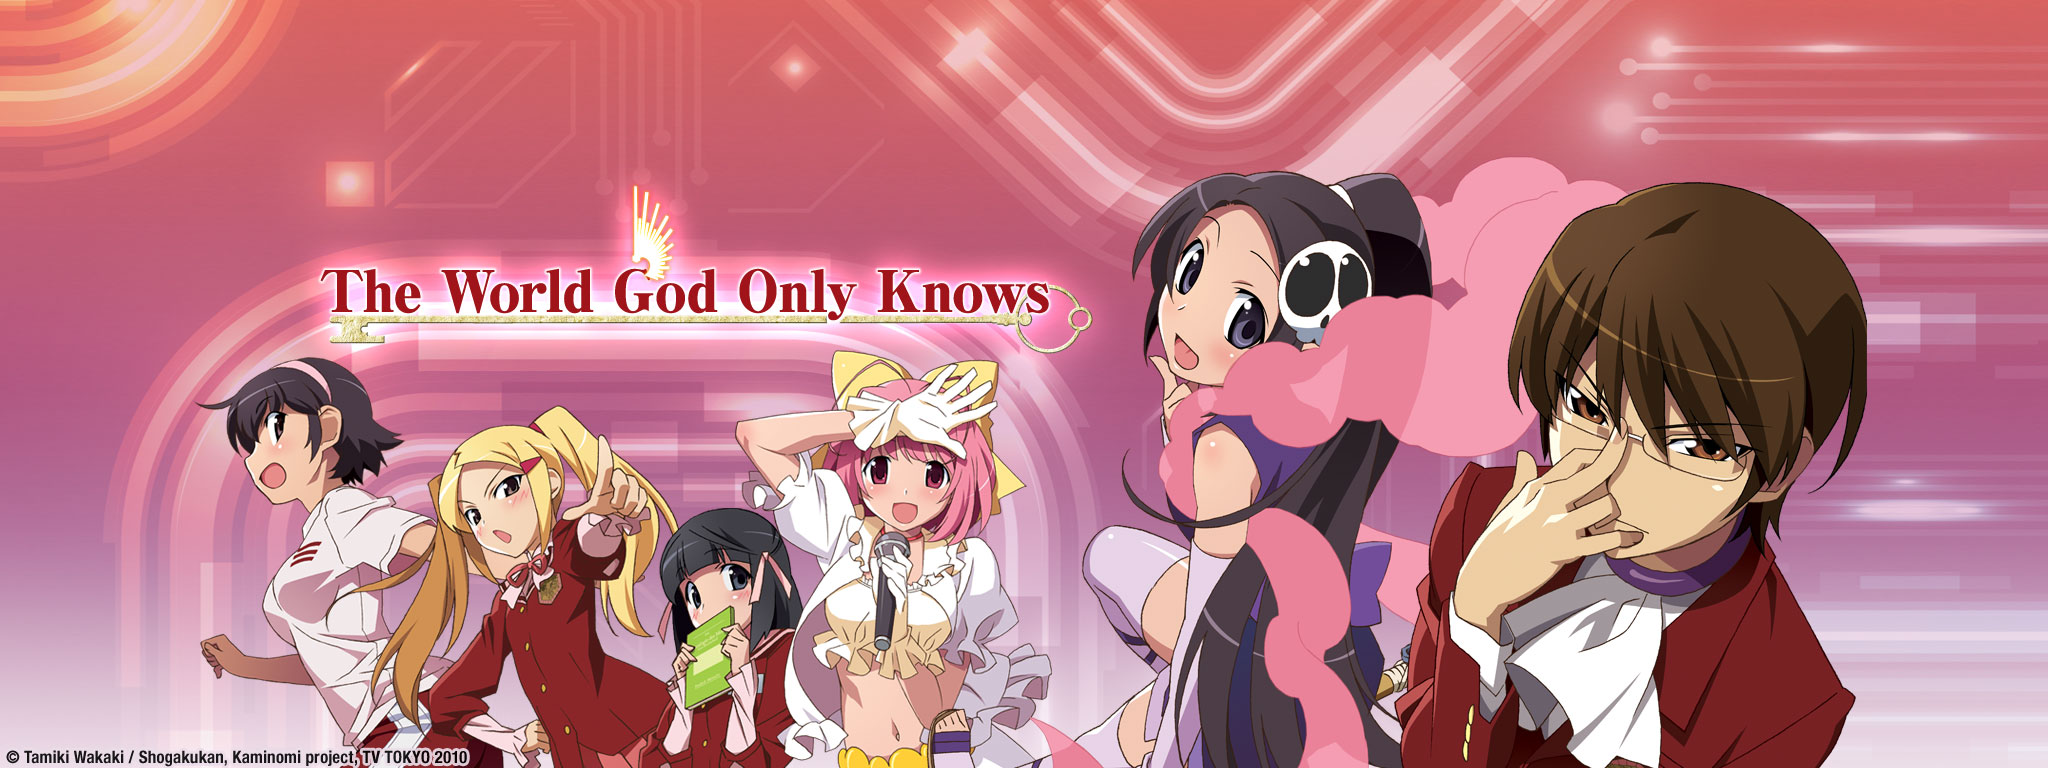 Title Art for The World God Only Knows